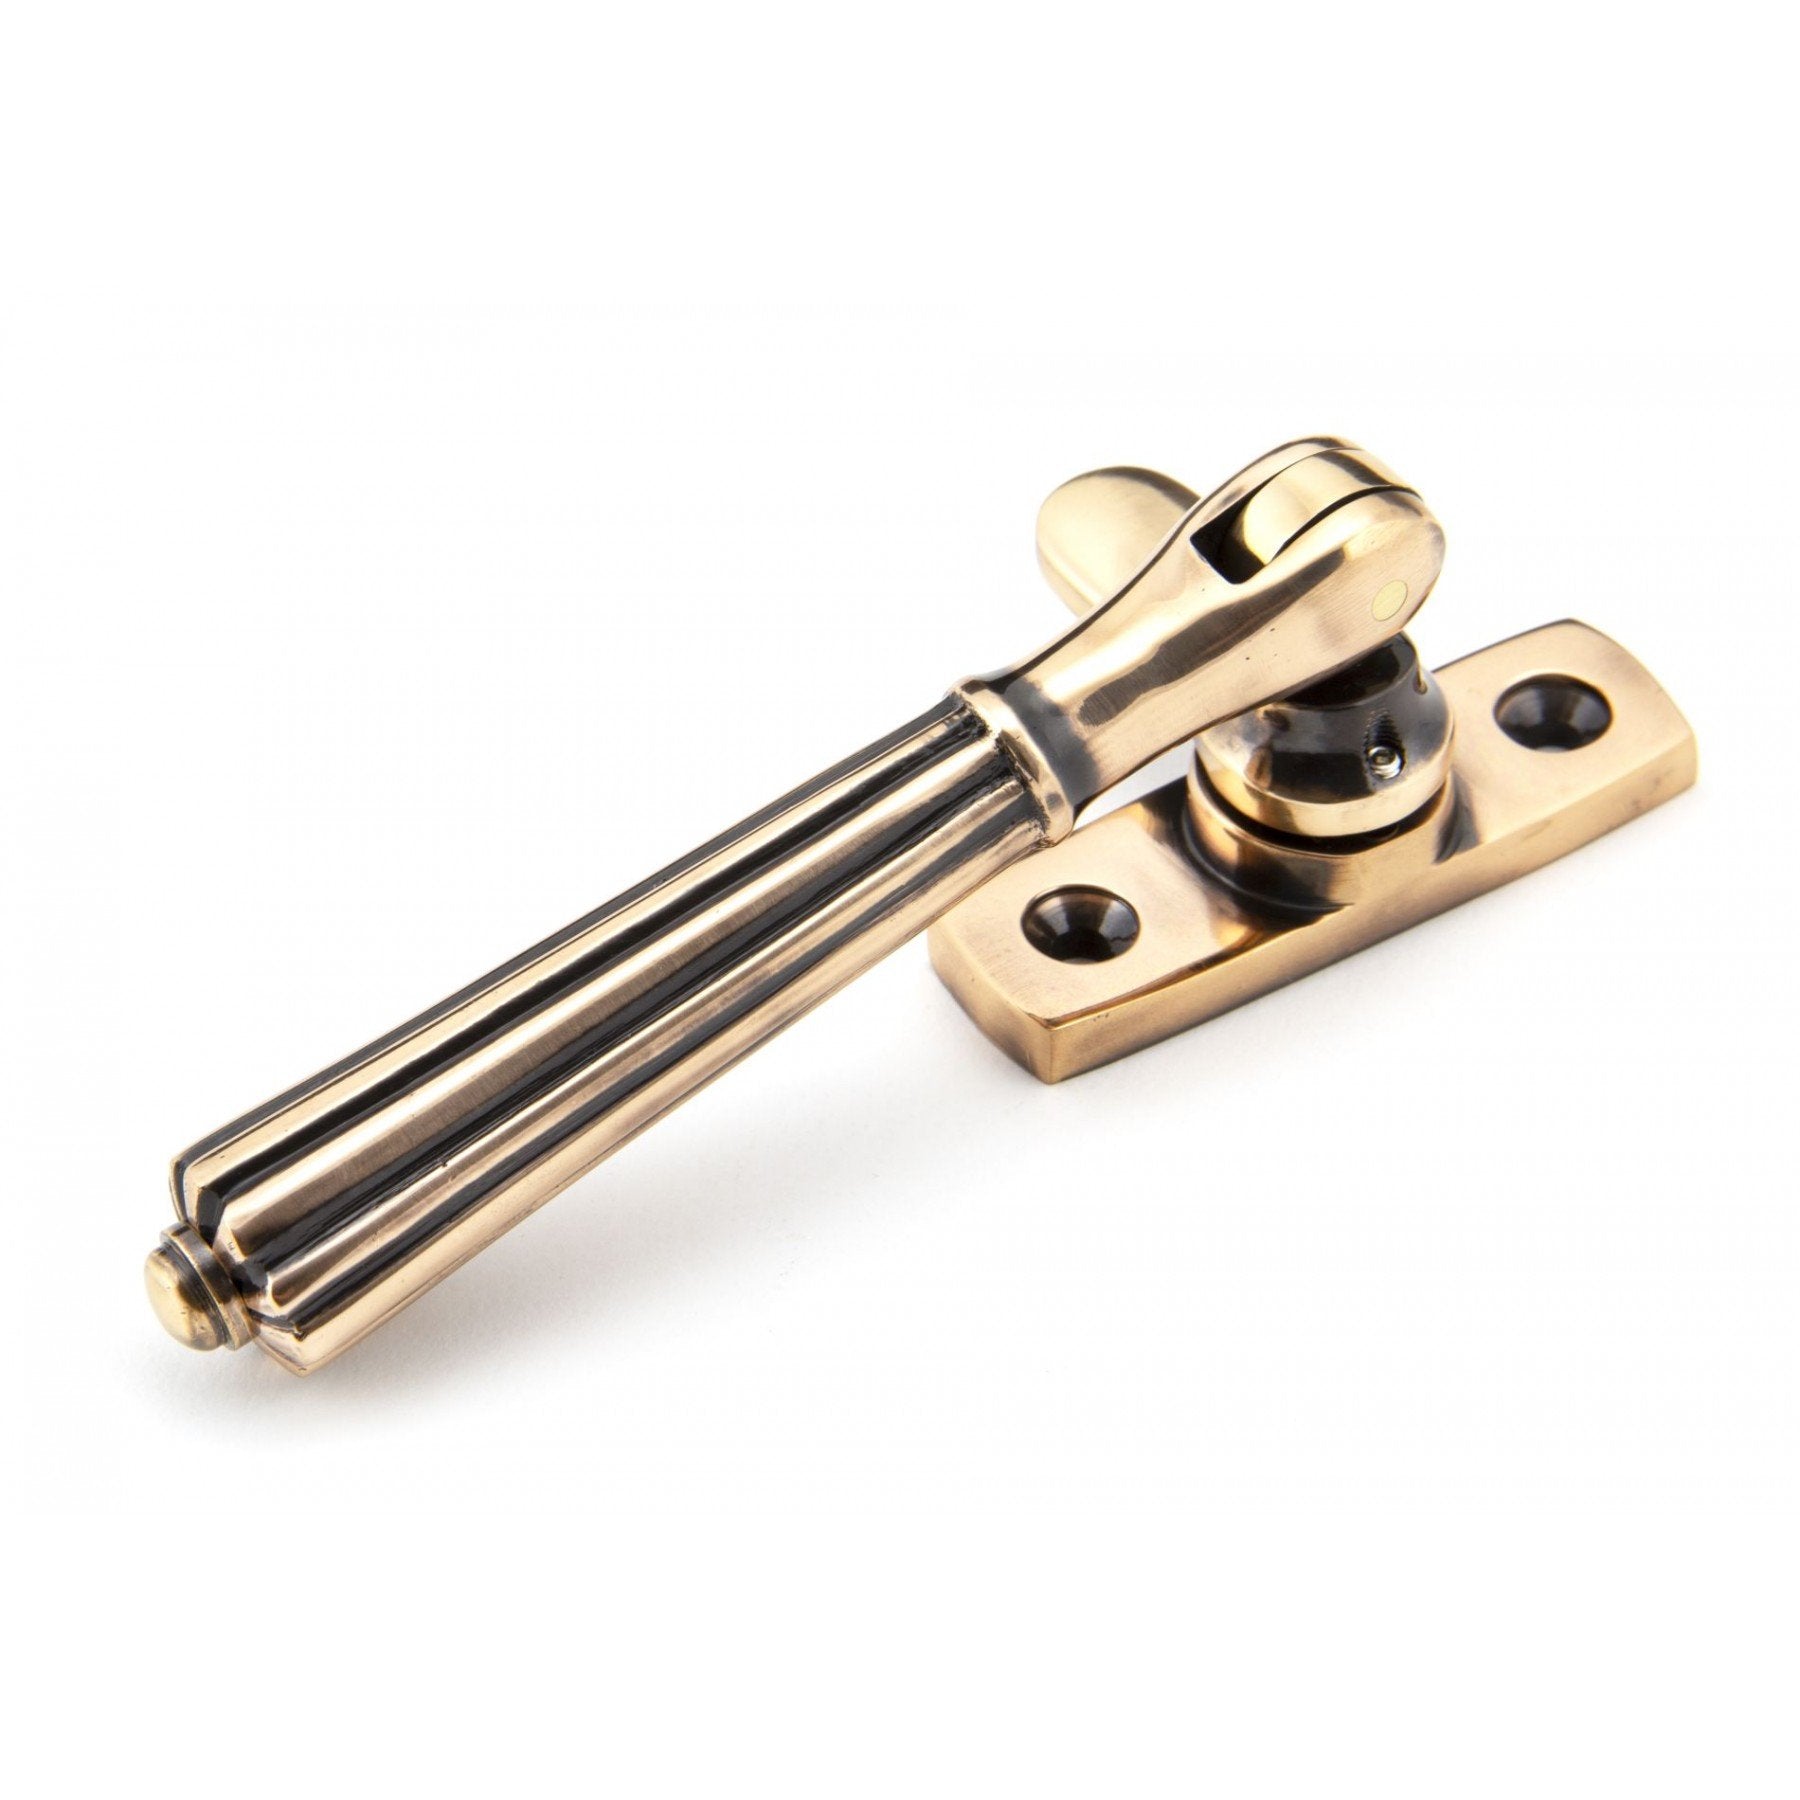 From the Anvil Polished Bronze Locking Hinton Fastener